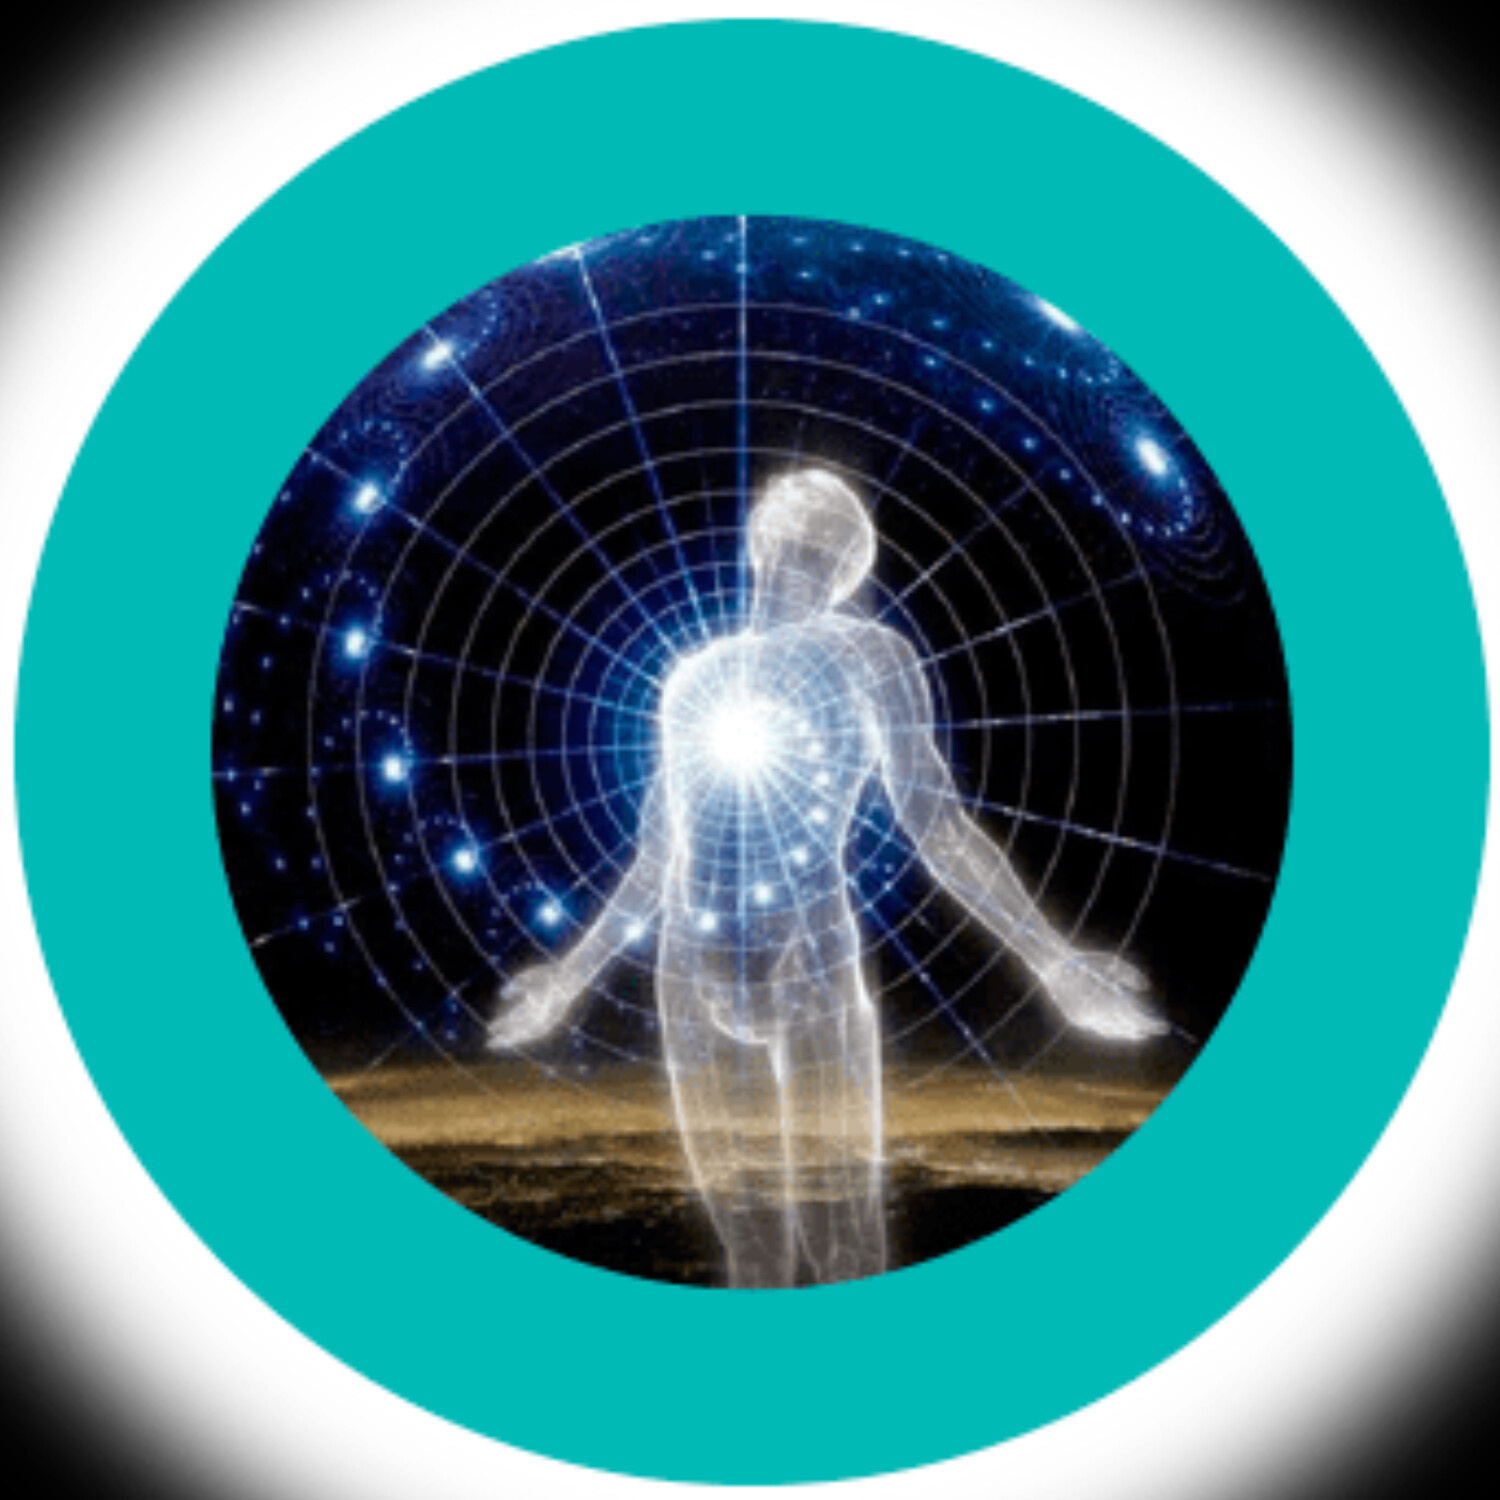 Special Episode of Shungite Reality Podcast shared on Metaphysical Perspectives Podcast